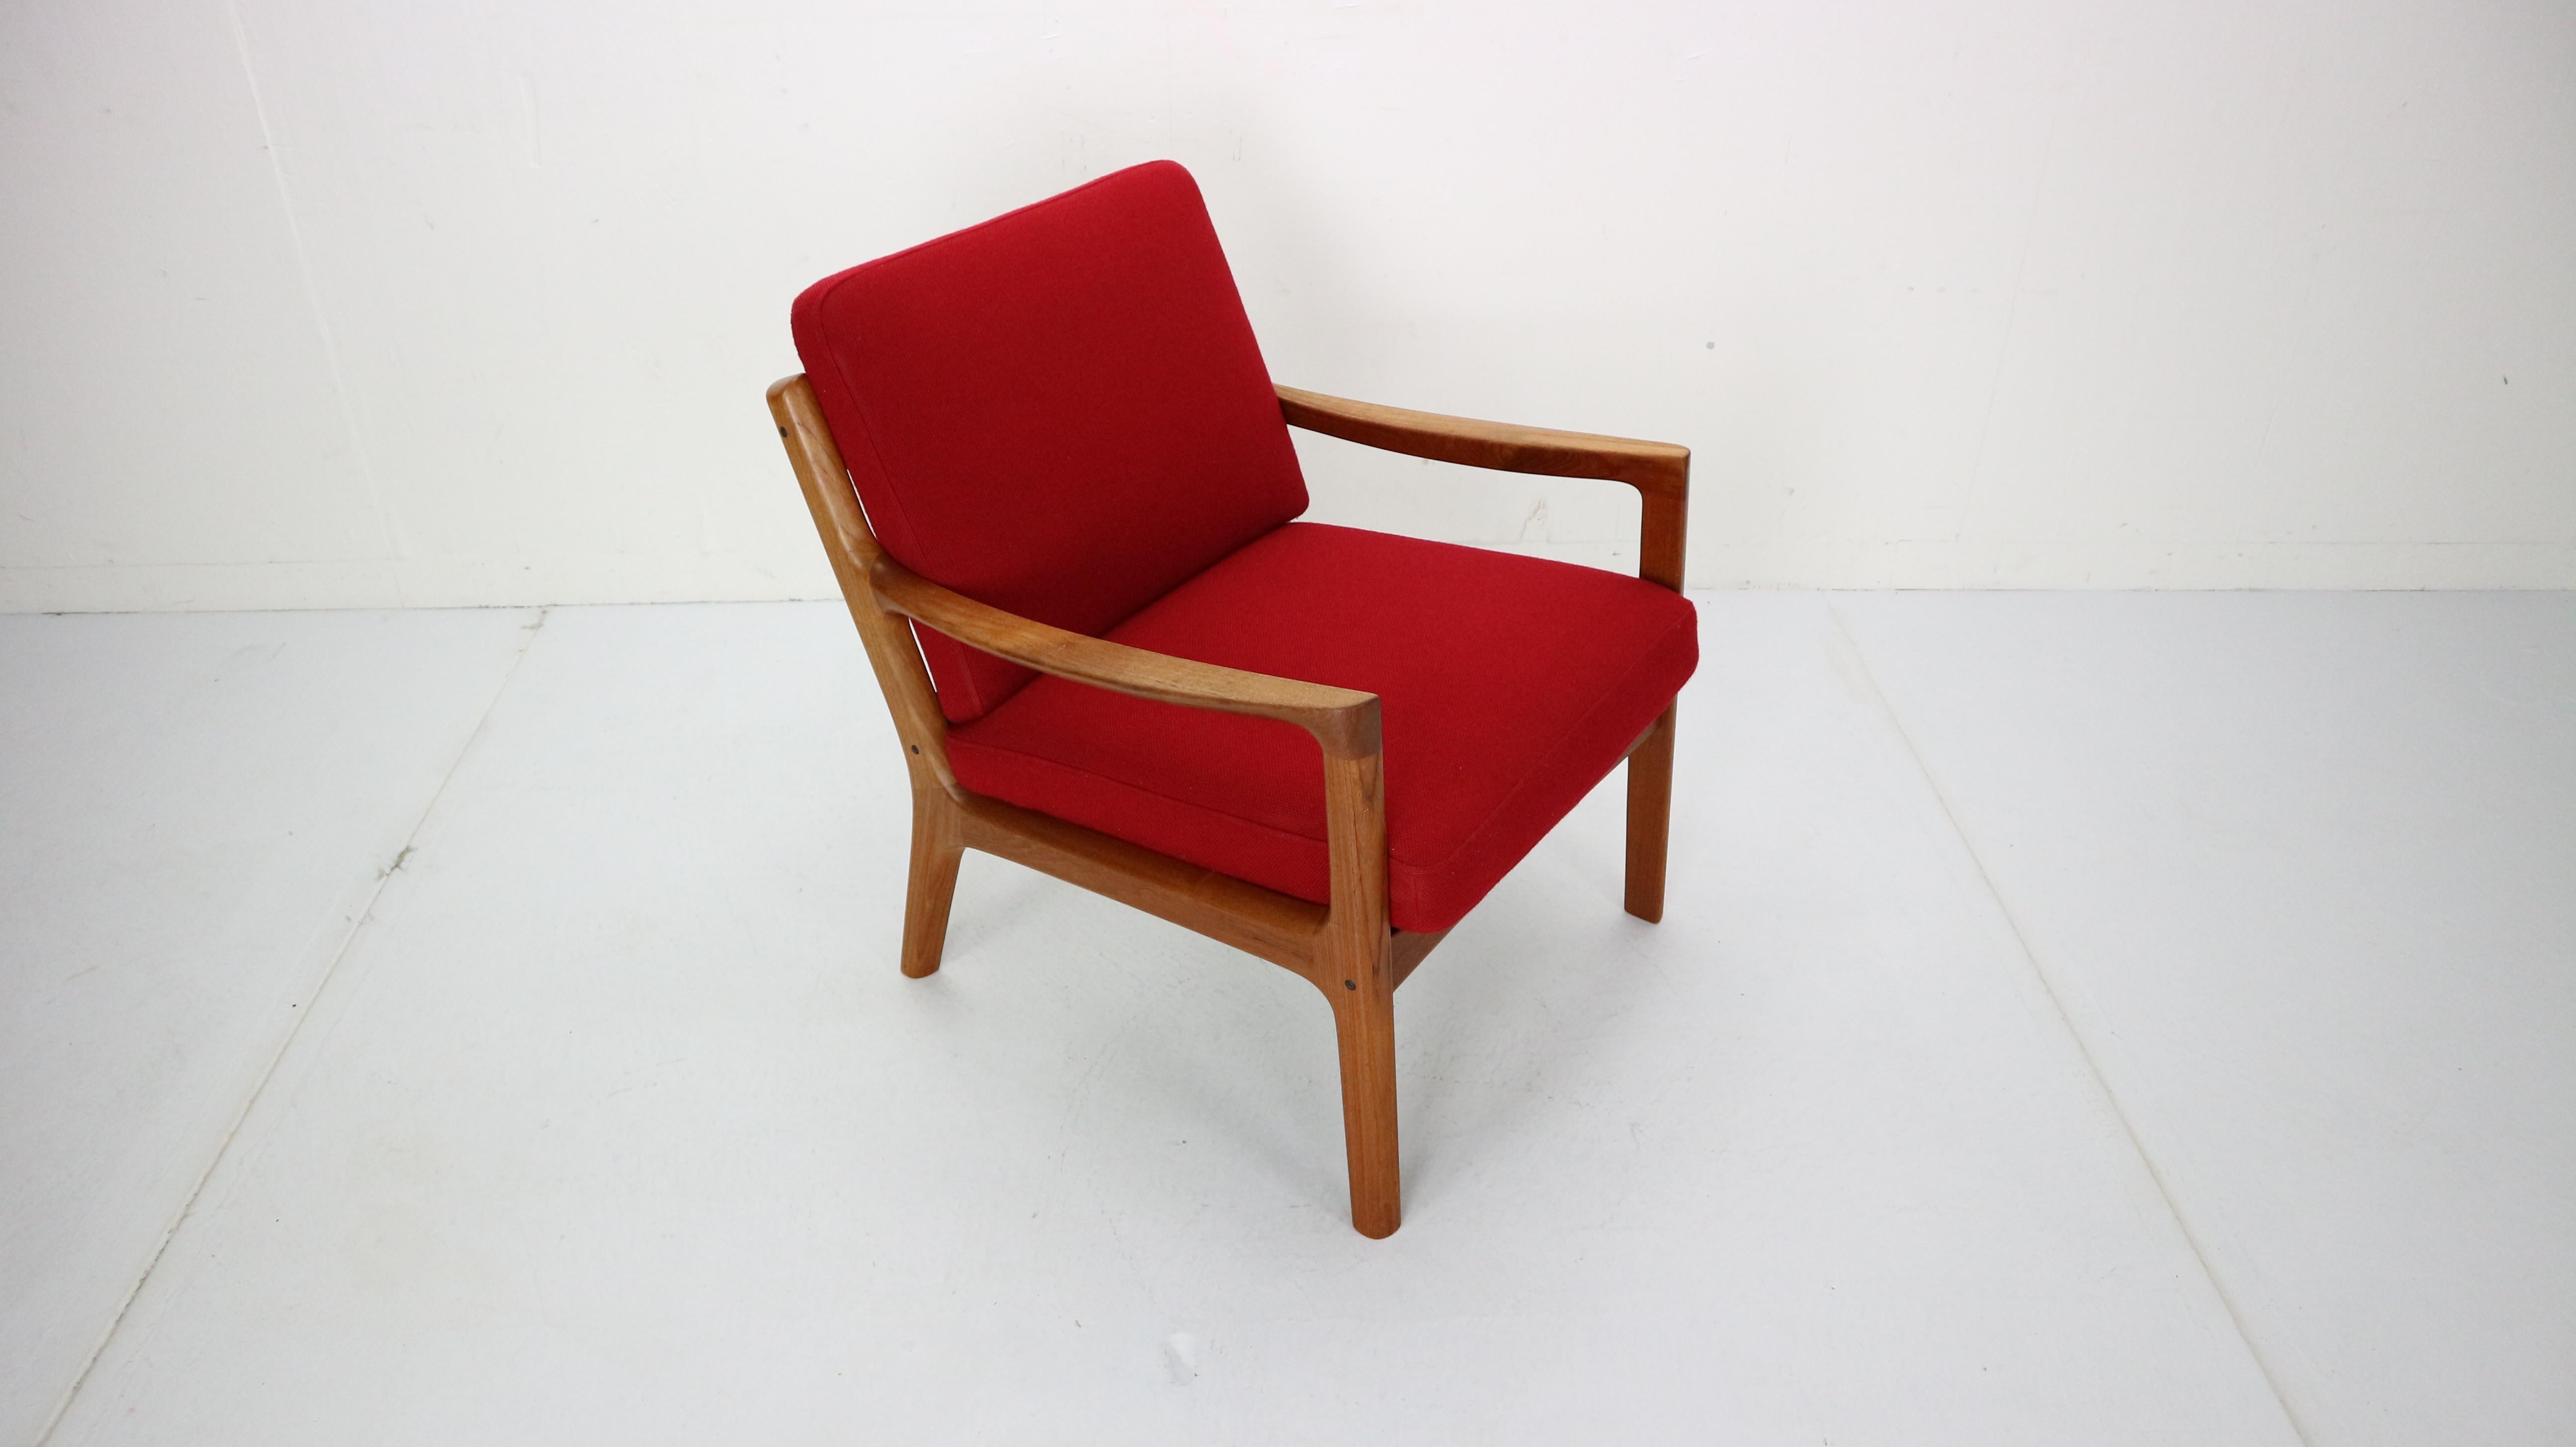 Beautiful lounge - armrest chair designed by Ole Wanscher and manufactured for France & Søn in 1950s Denmark.
Comfortable seating upholstered in red wool fabric, chair frame is elegantly curved and made from teak wood.
This chair comes from